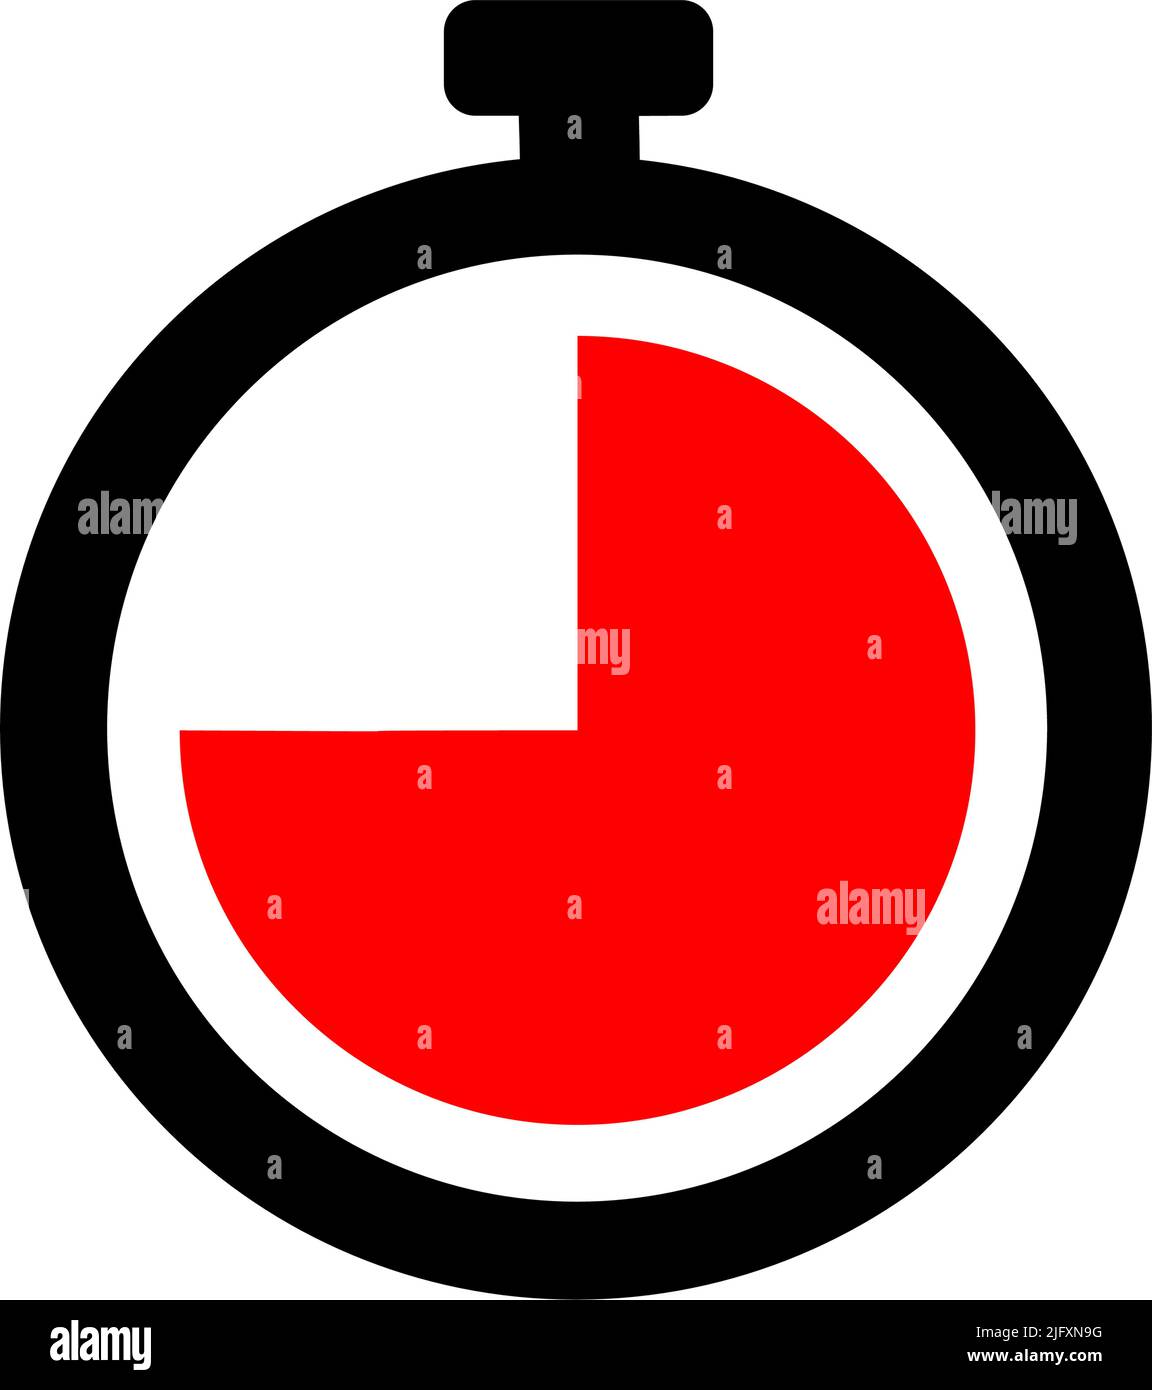 45 MINUTES. TIMER CLOCK WITH THREE QUARTERS OF AN HOUR IN RED. Stock Vector